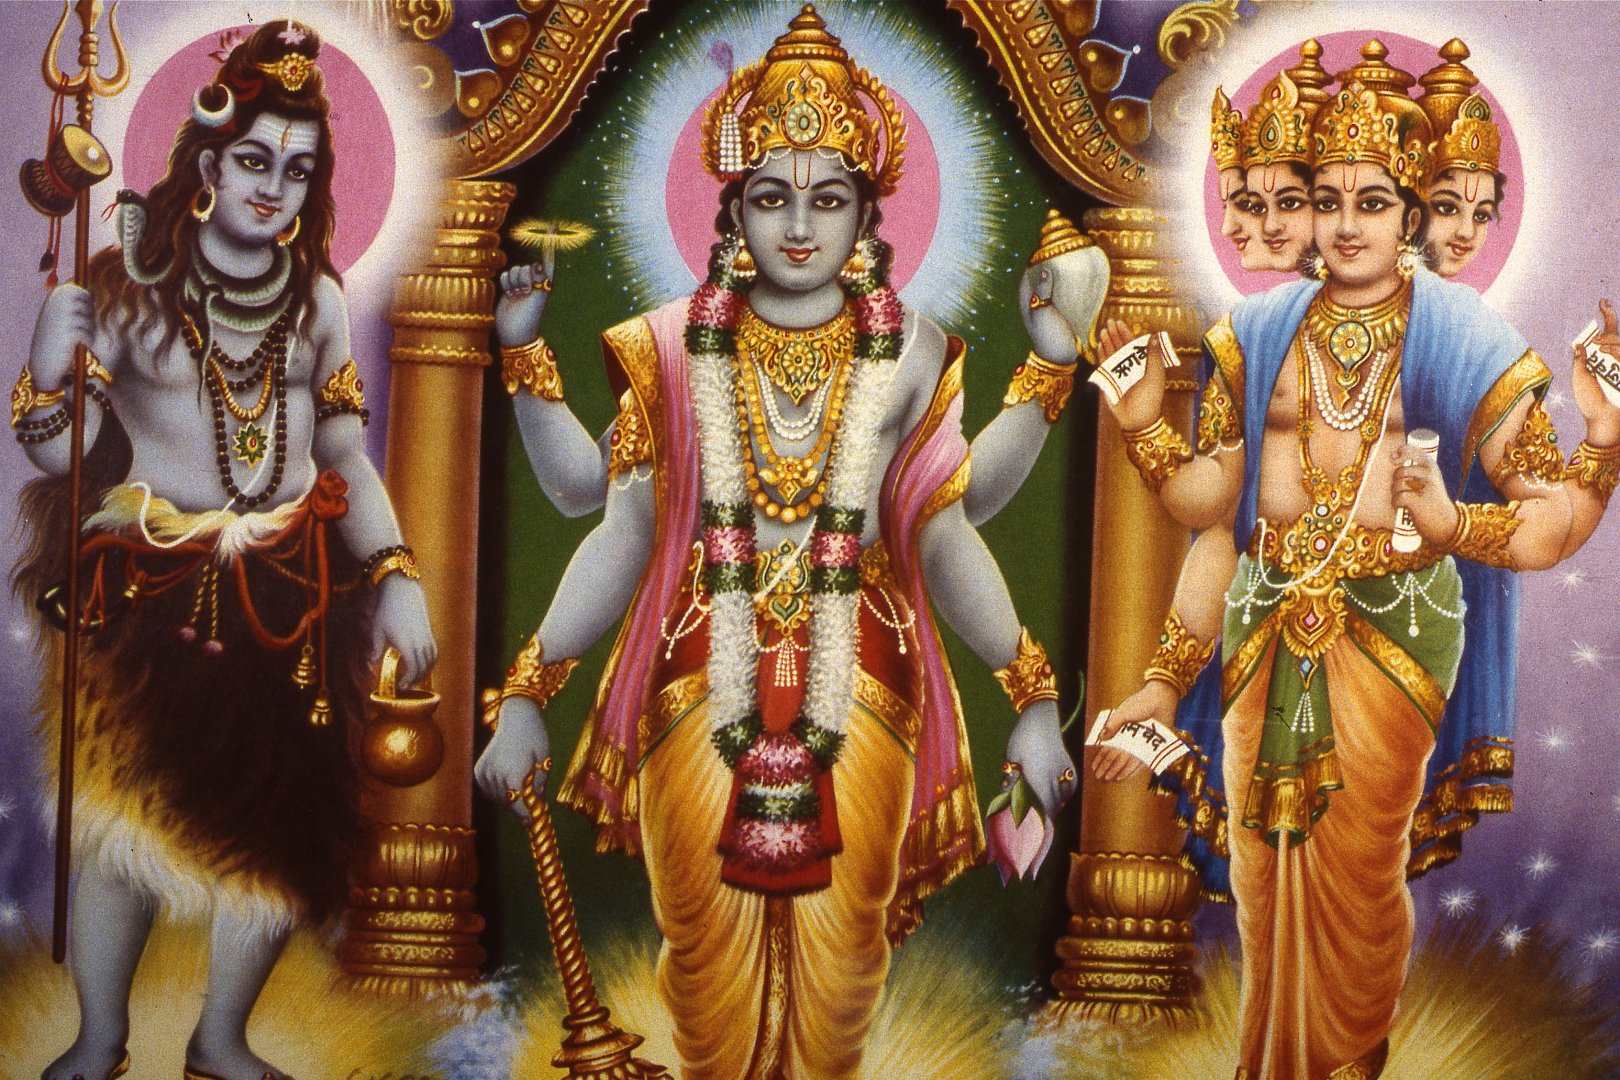 Hindu Americans oppose 'negative portrayal' of Hinduism by CNN